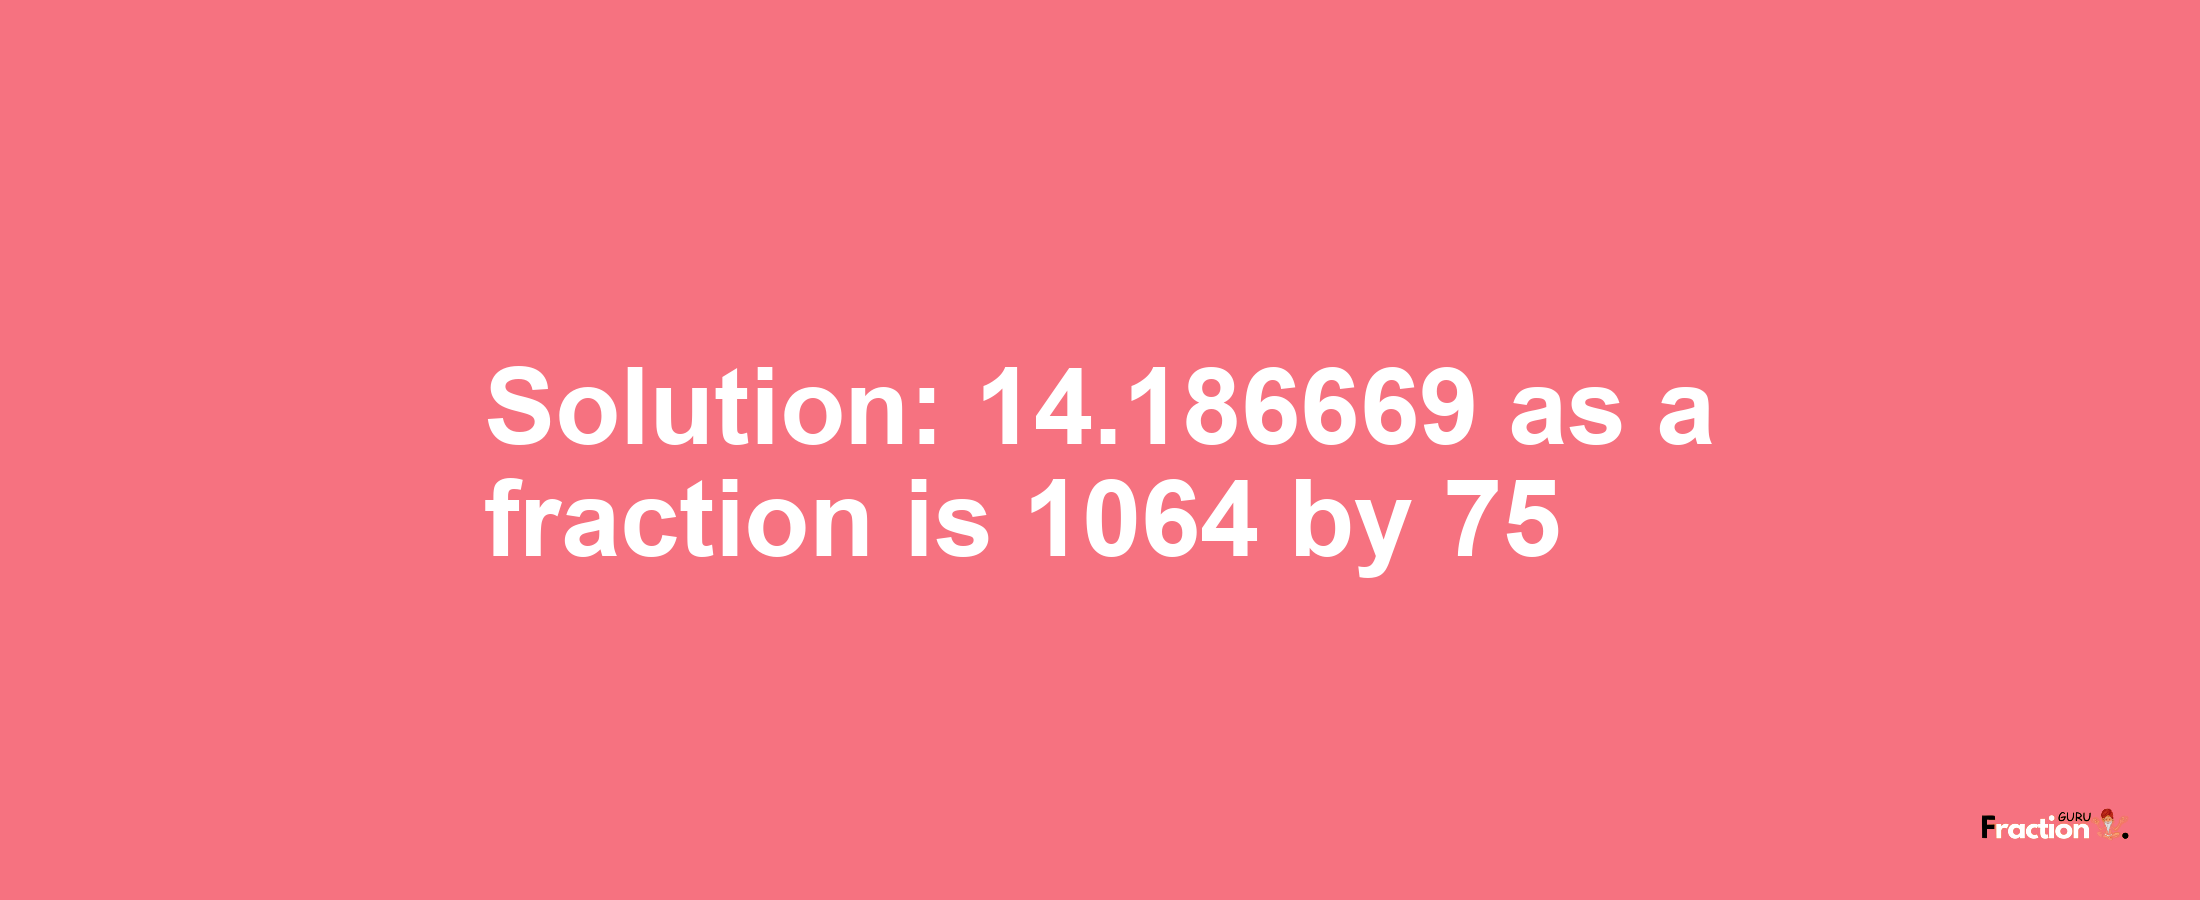 Solution:14.186669 as a fraction is 1064/75